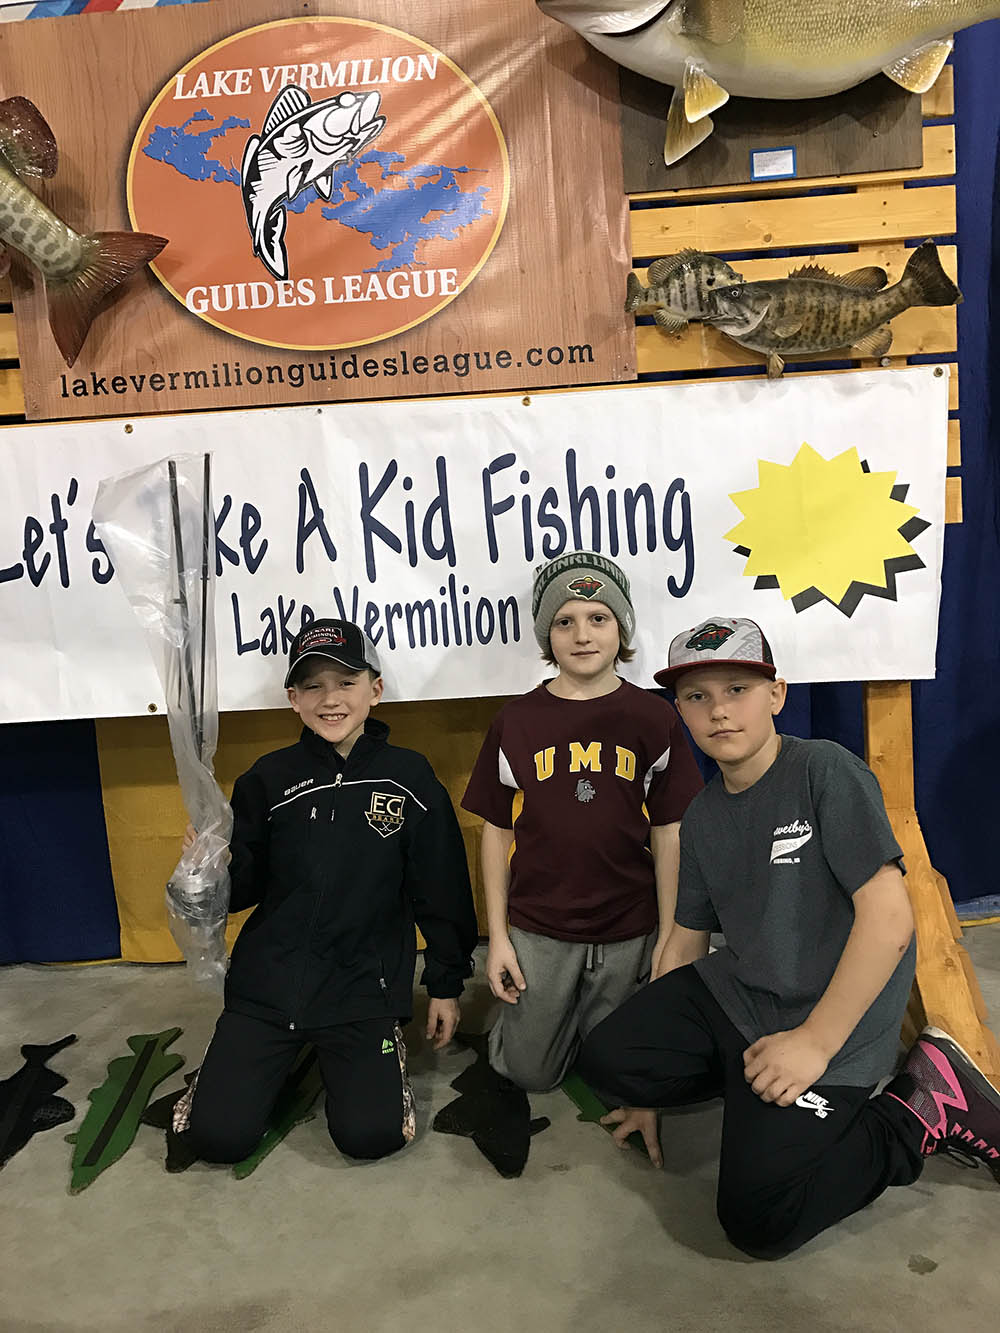 Kids posing for Lets Take a Kid Fishing event